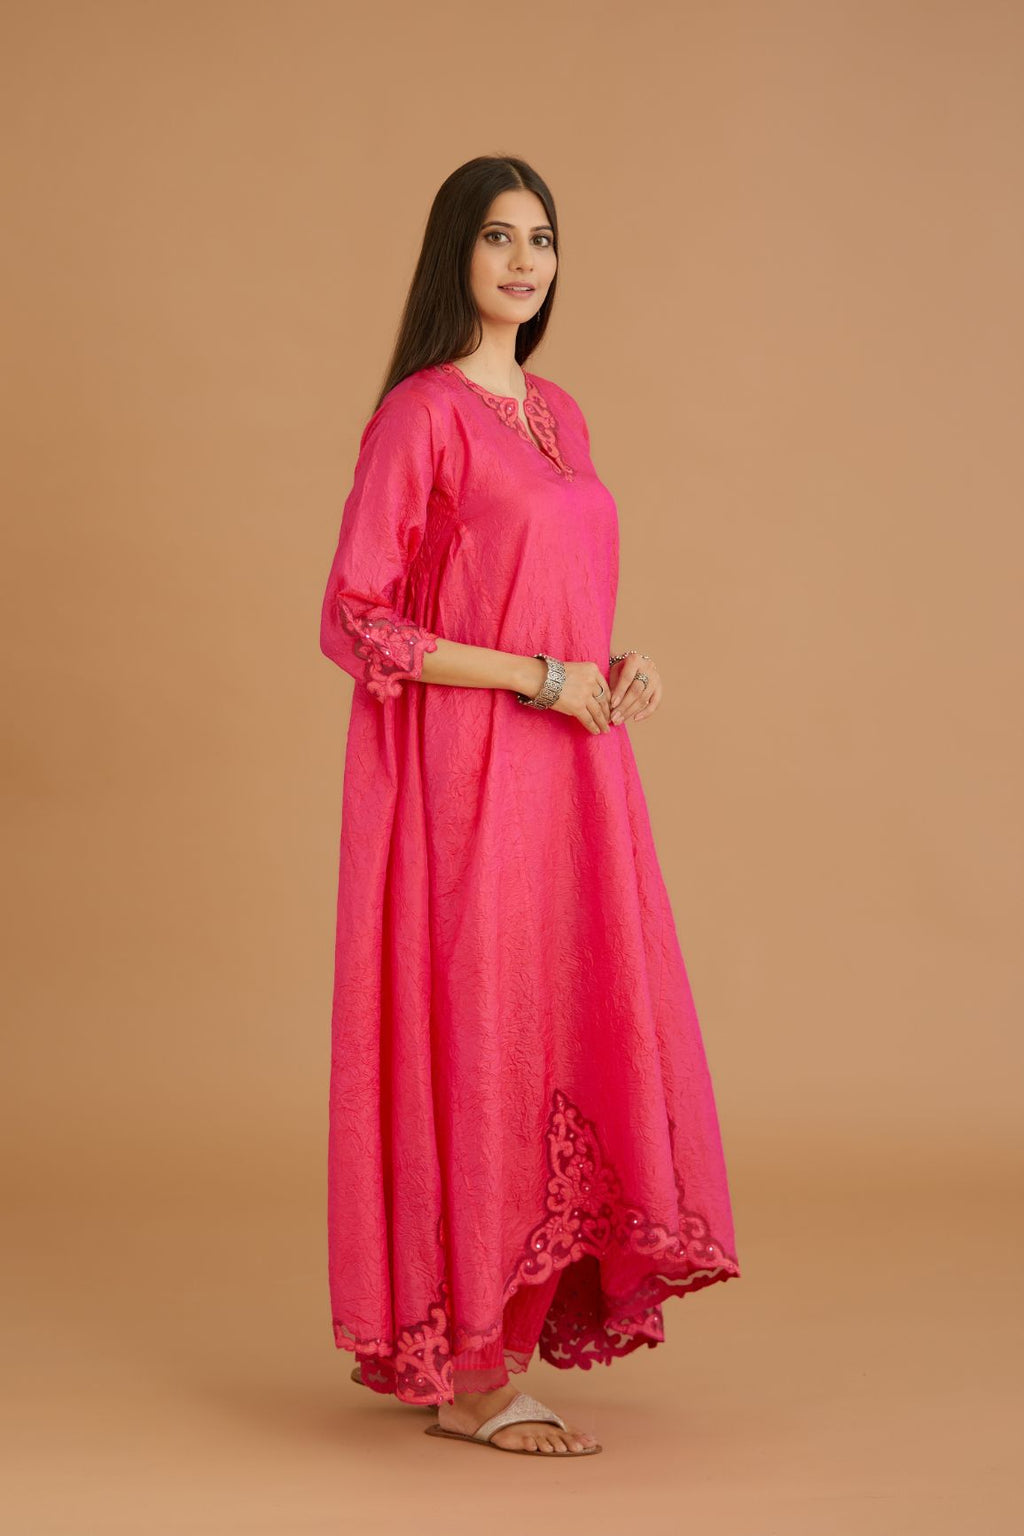 Fuchsia hand crushed silk kurta set with cutwork embroidered asymmetric hem, highlighted with hand attached mirrors.